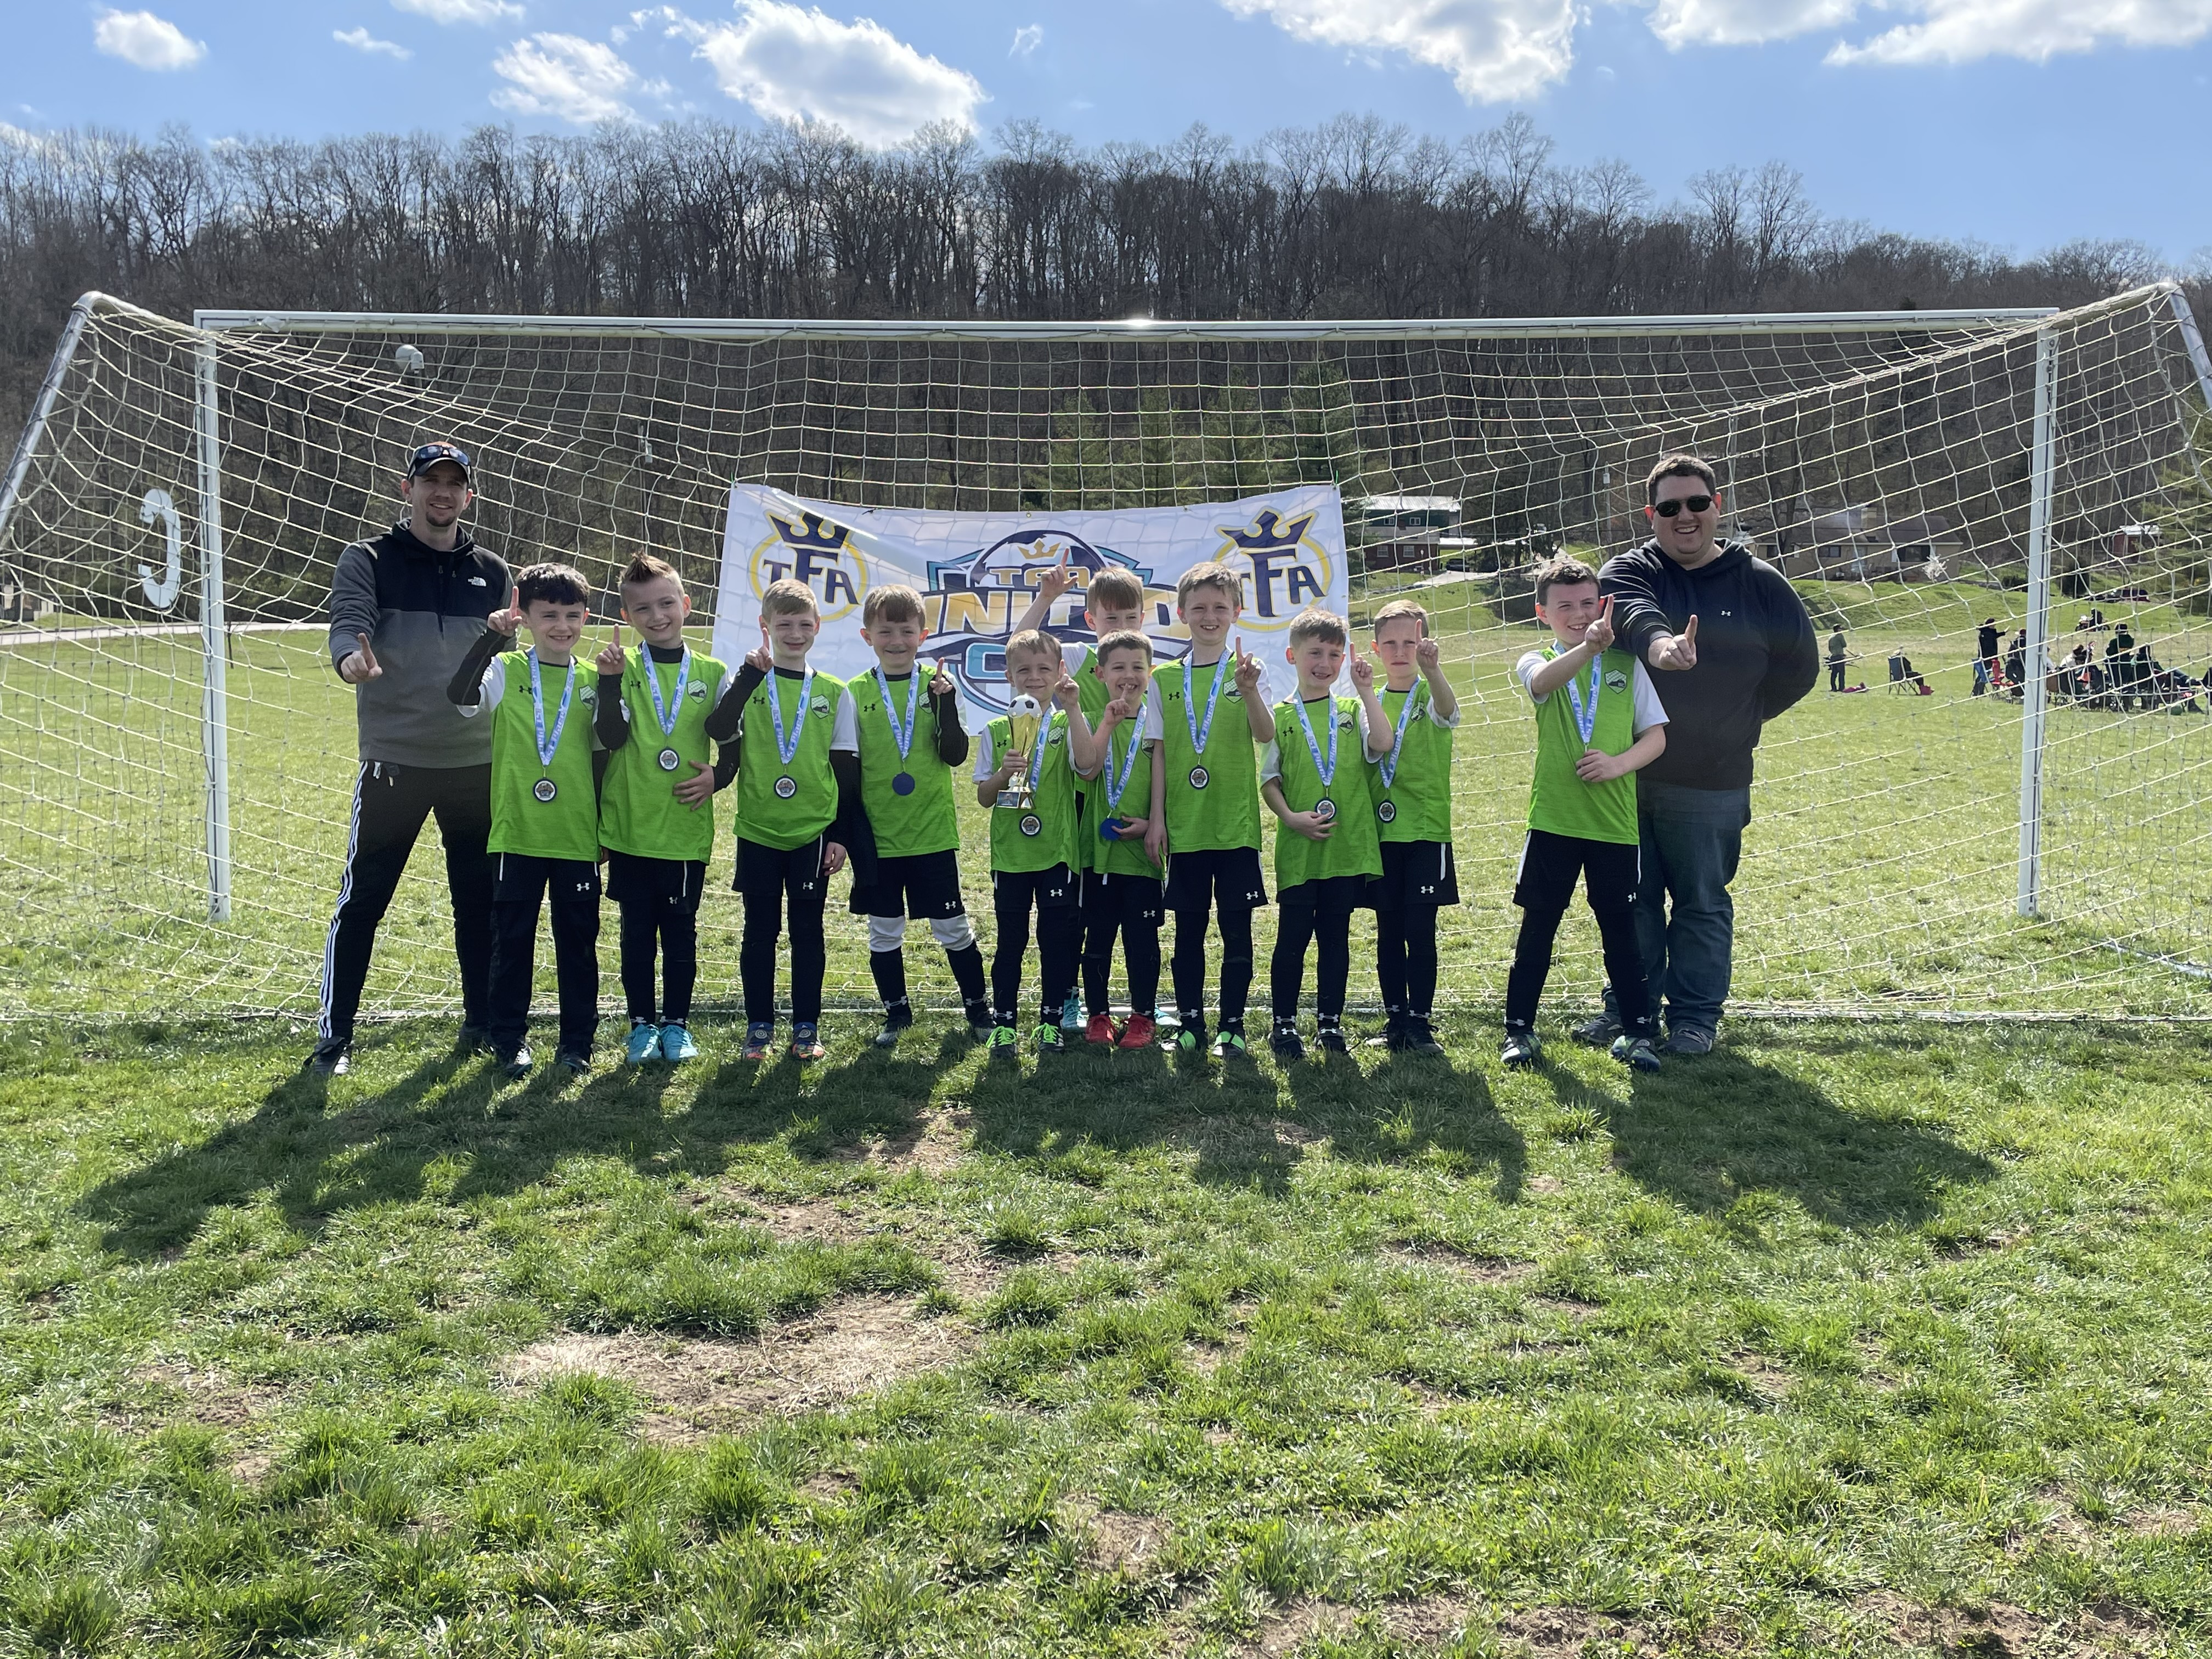 ISC Lightning Win's Boys U11 Navy Division at TFU United Cup